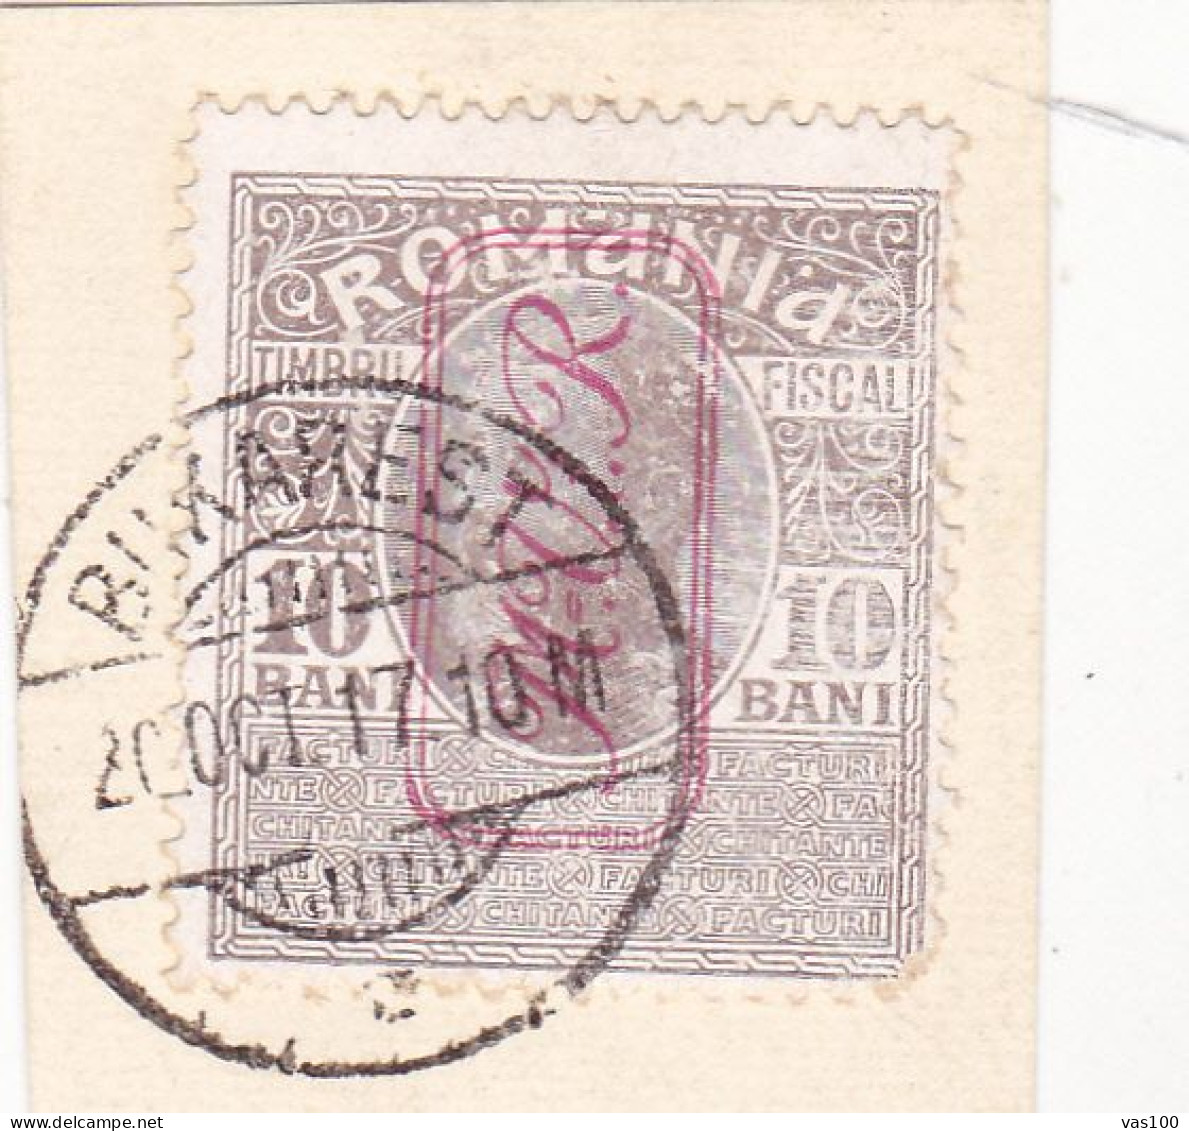 Germany WW1 Occupation In Romania 1917 MViR 10 BANI FISCAL POSTAGE USED FRAGMENT RARE! - Foreign Occupations